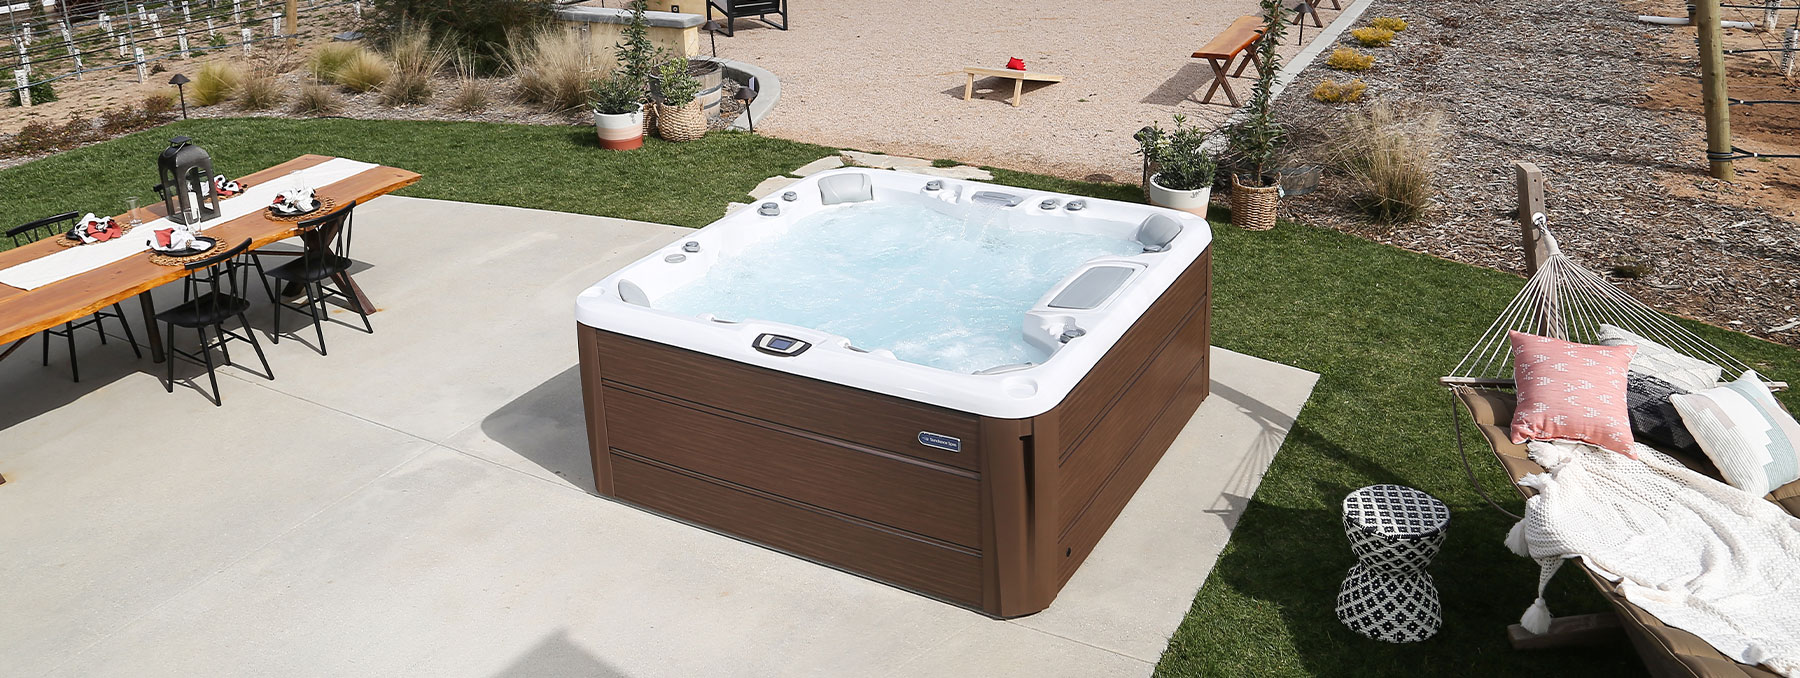 Do I need an electrician or special wiring for a hot tub?